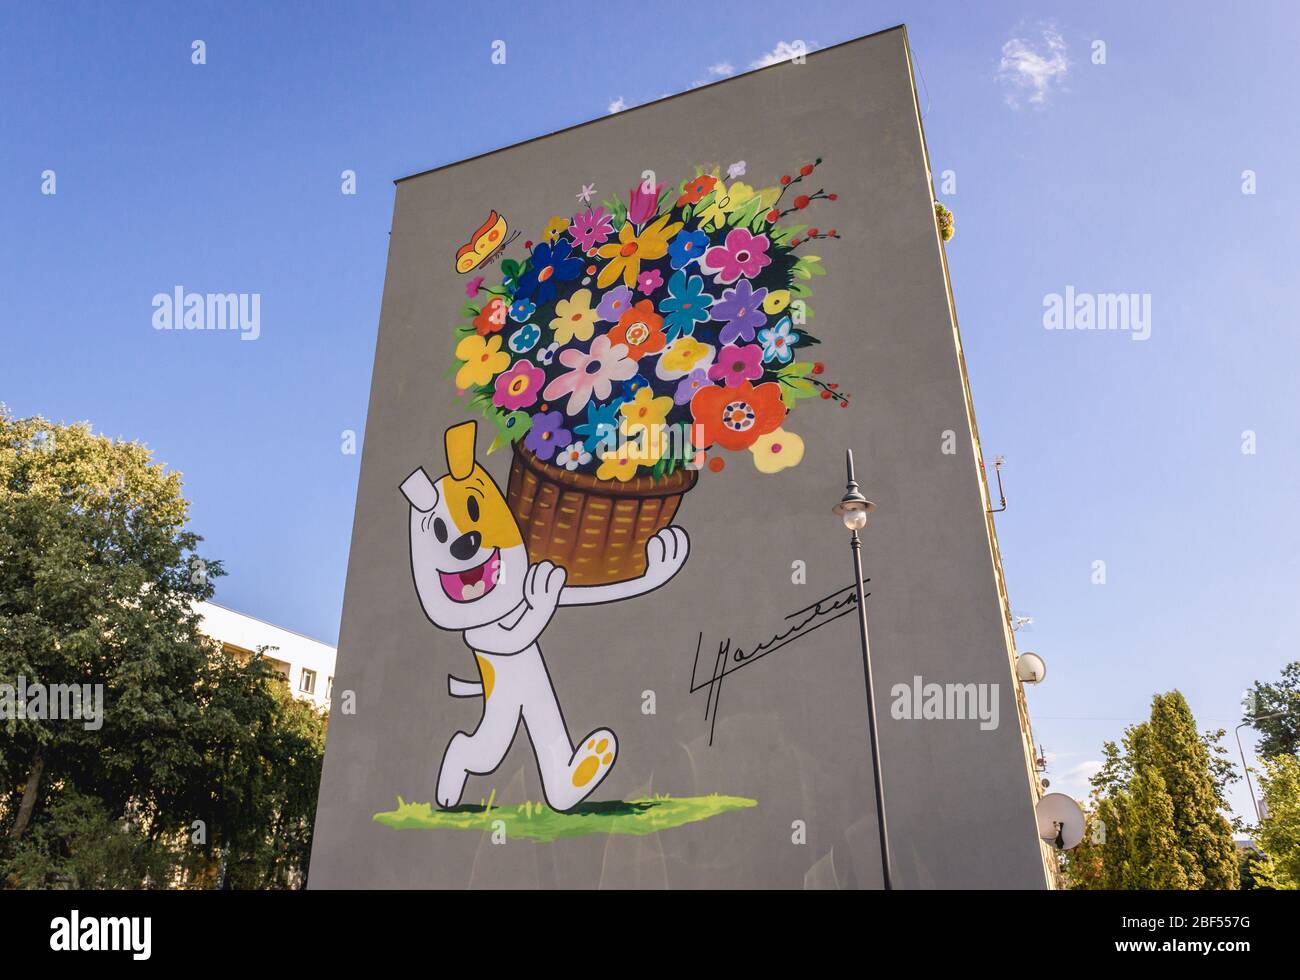 Reksio Polish cartoon character painting on a residential building wall in Suwalki city, located in Podlaskie Voivodeship of northeastern Poland Stock Photo